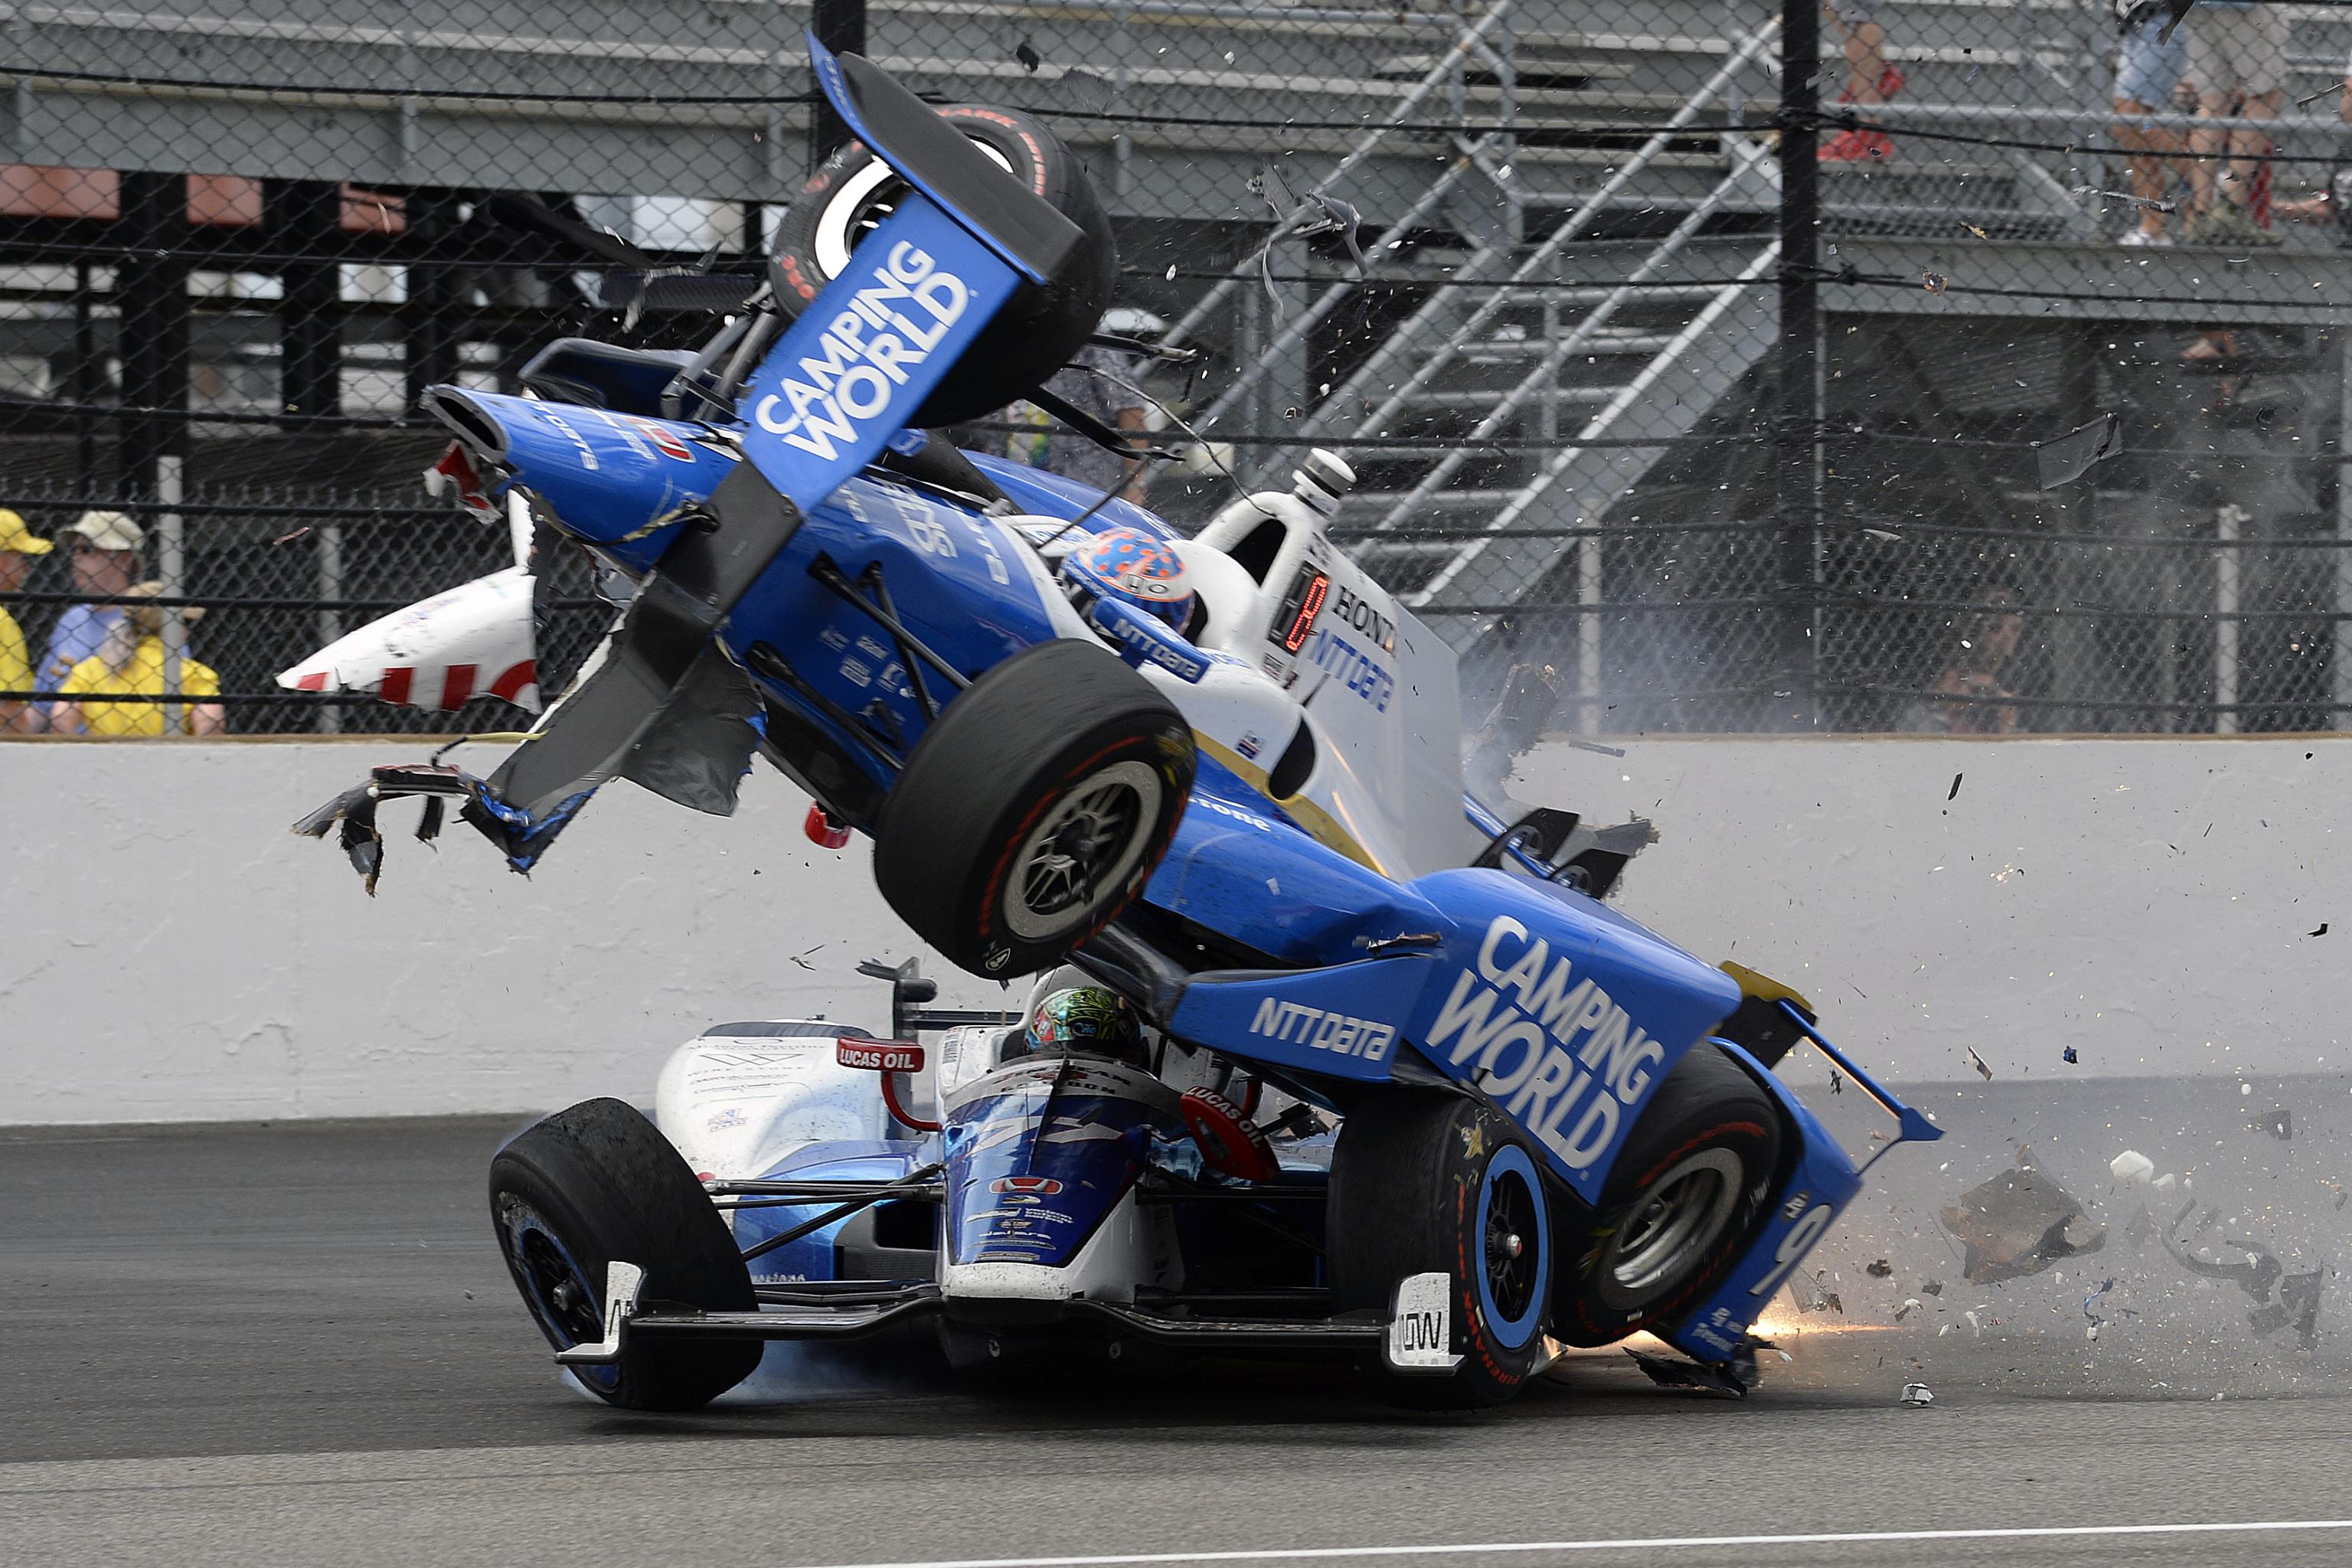 Scott Dixon Uninjured Out Of 17 Indy 500 After Horrific Fiery Airborne Crash Bleacher Report Latest News Videos And Highlights